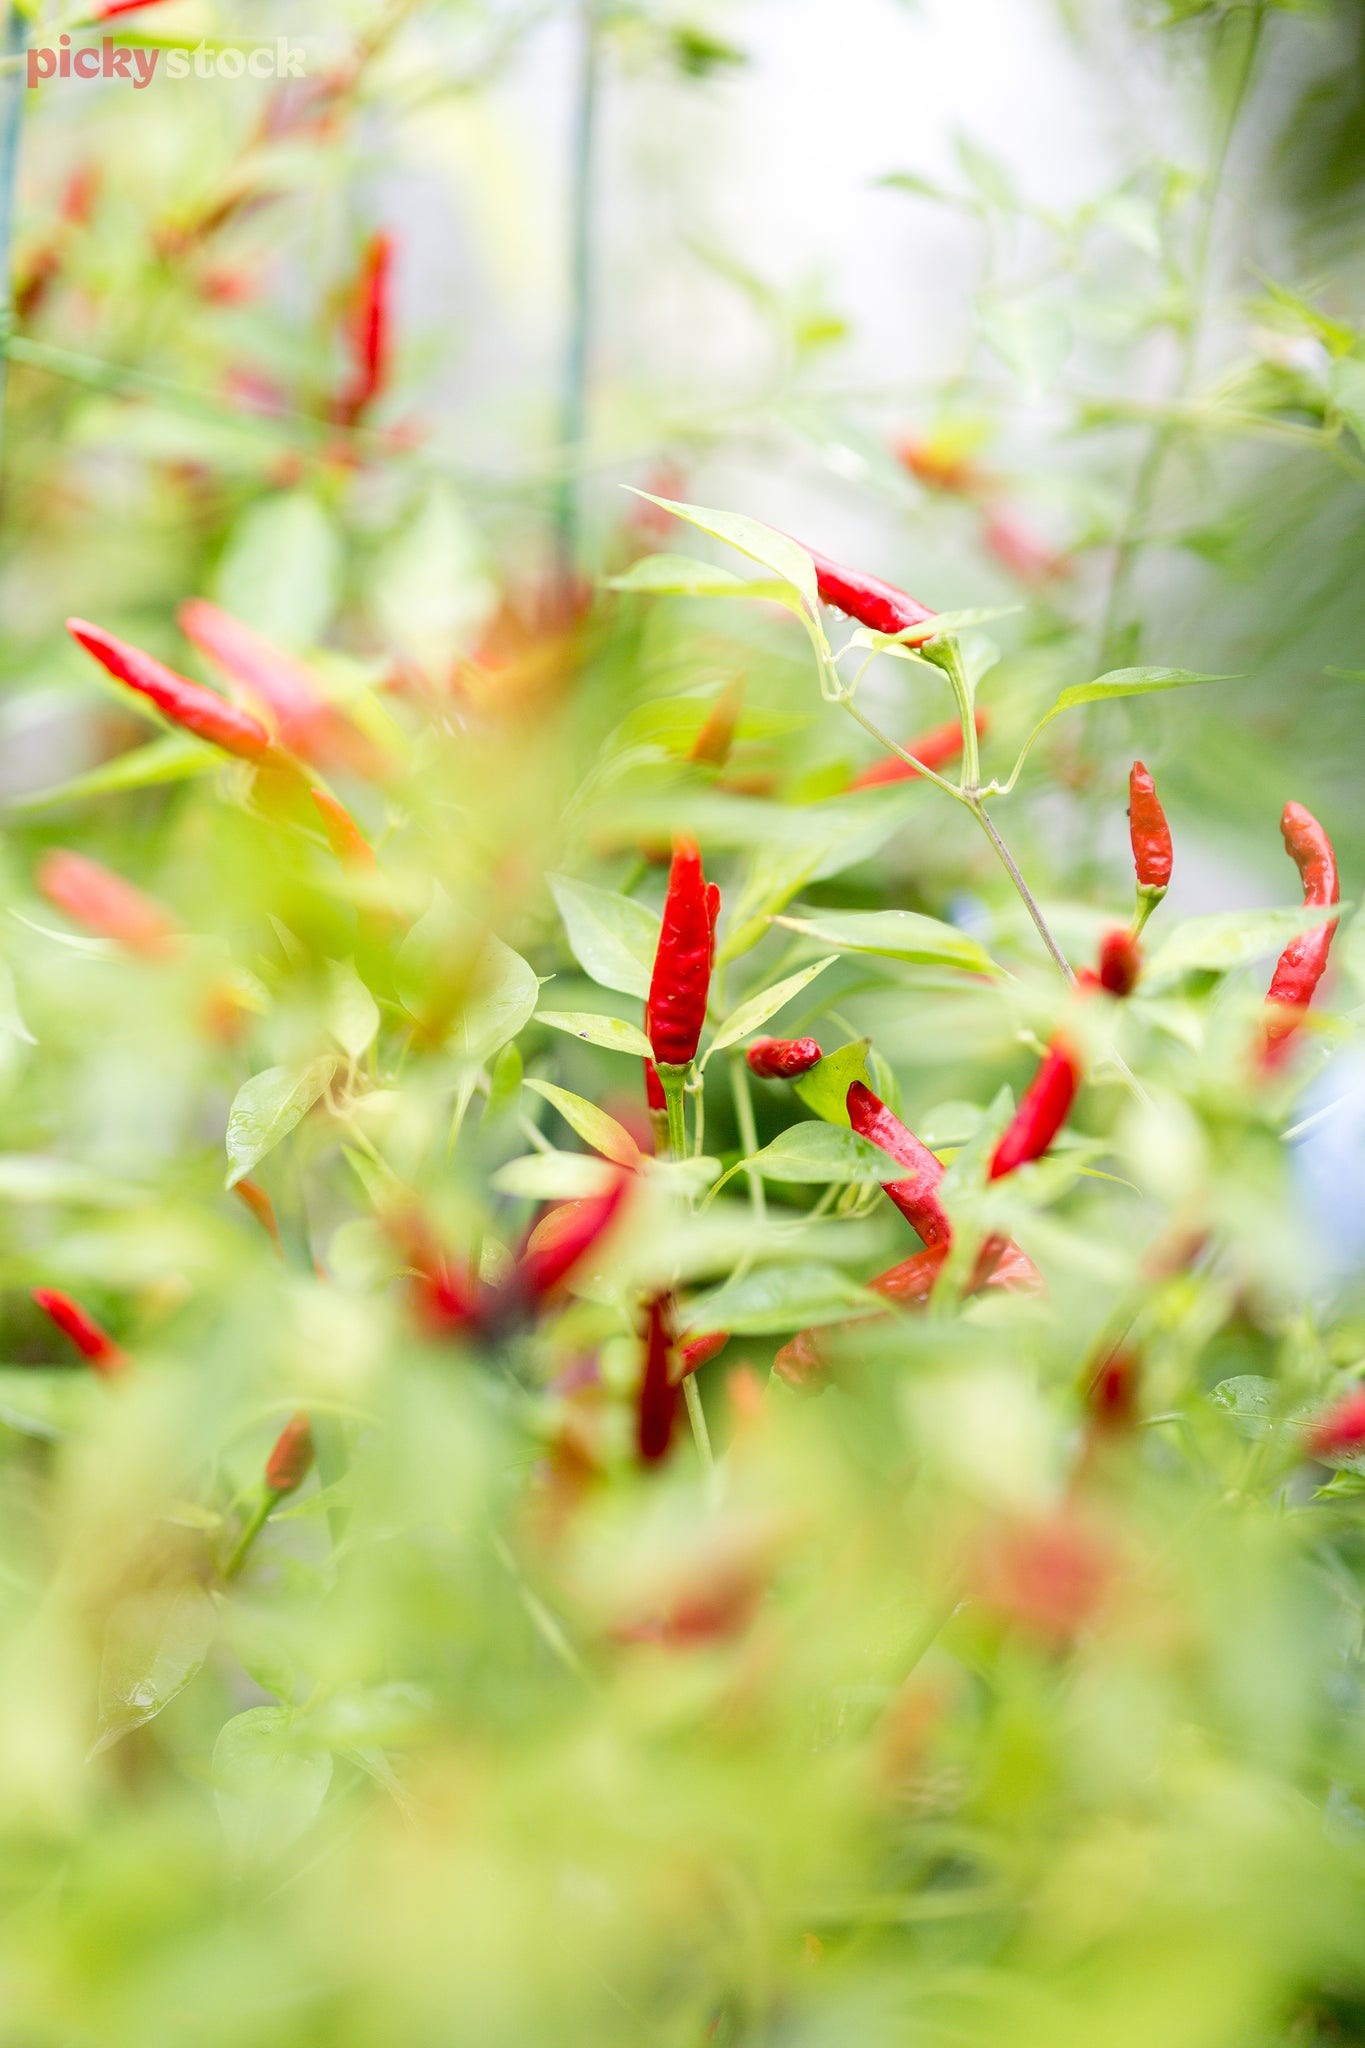 Looking through the green leaves of a chilli plant towards the red chillis growing on the branches. 